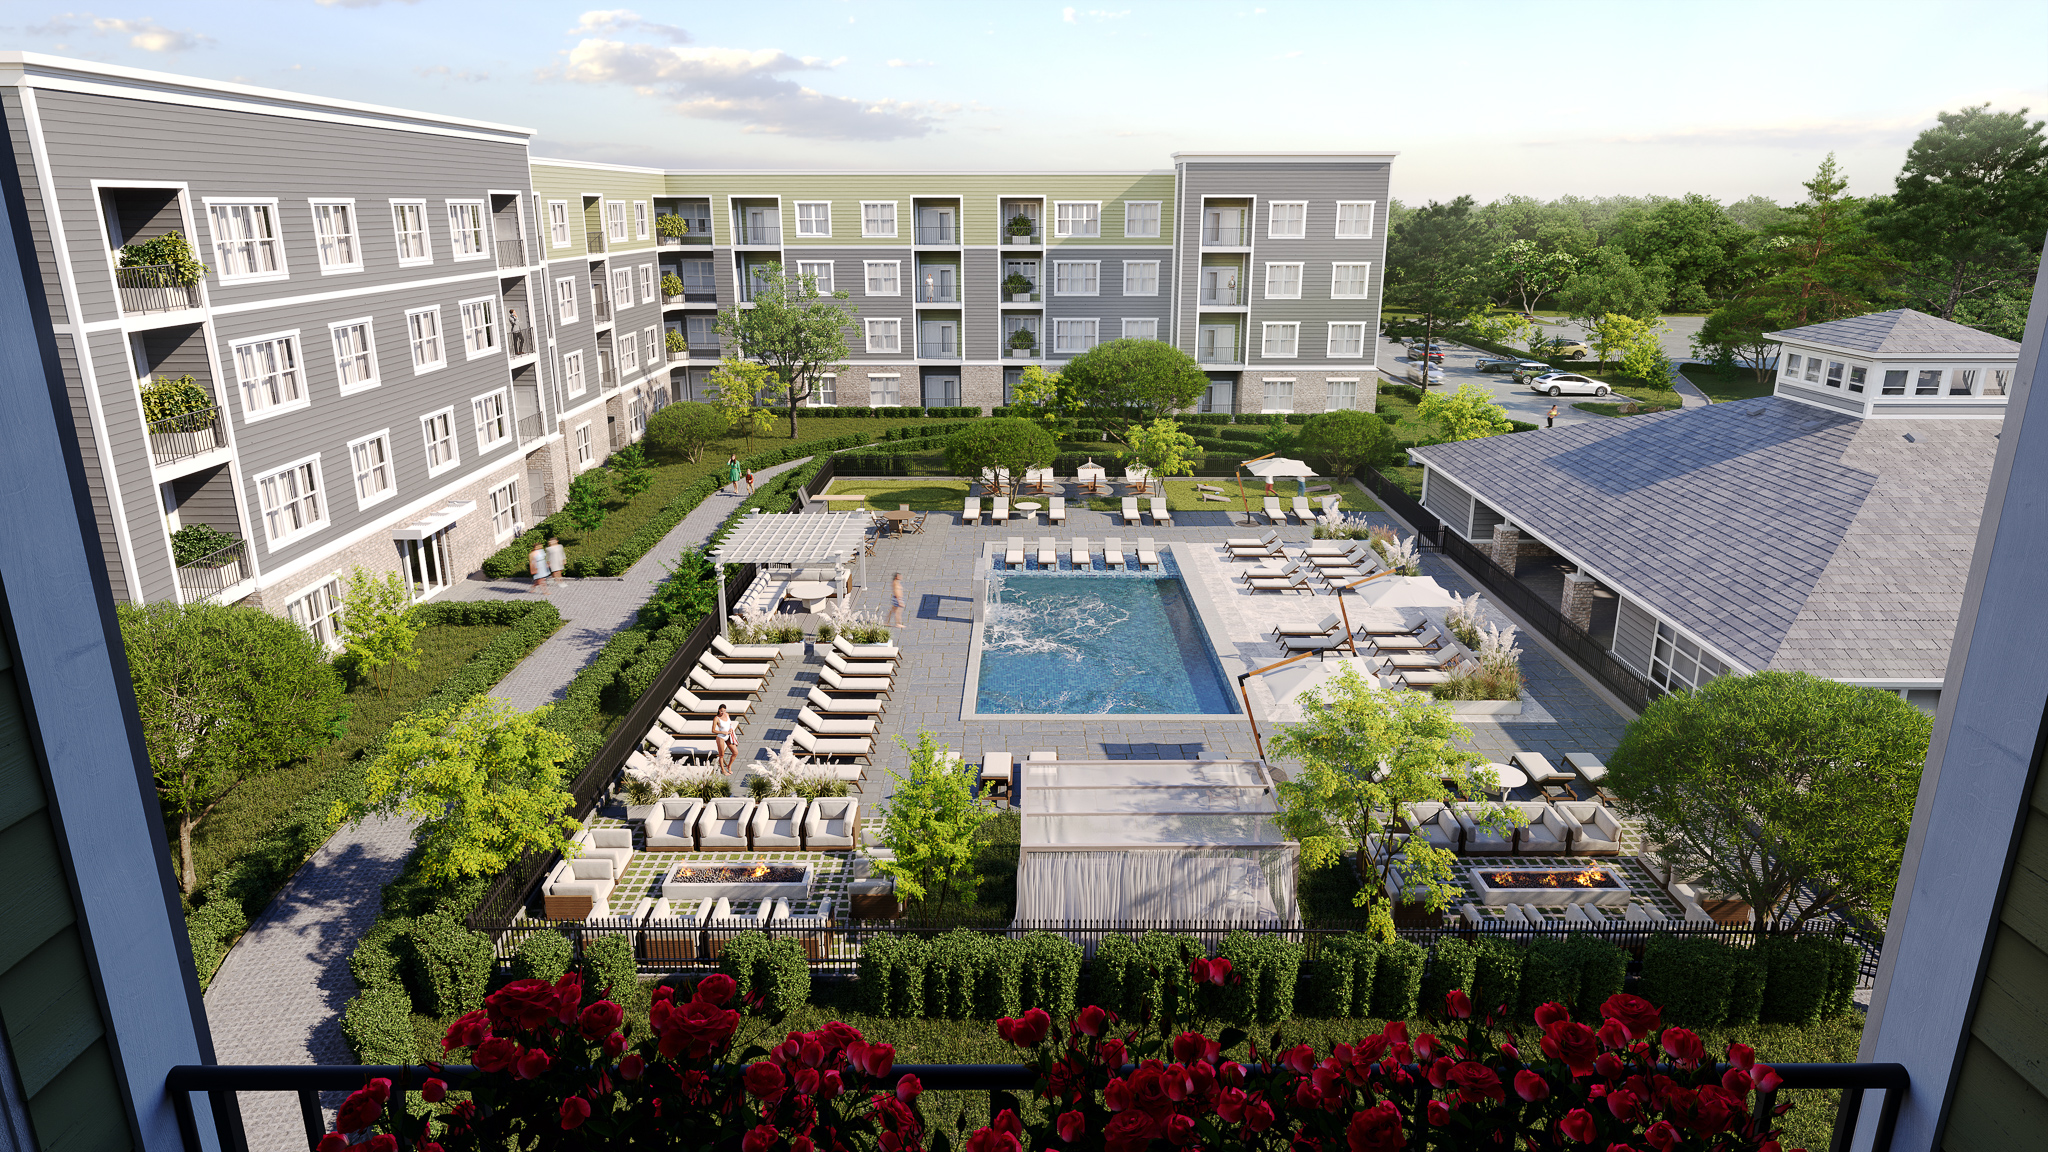 A rendering of the Forest Edge Apartments, a 248-unit luxury multifamily apartment community.